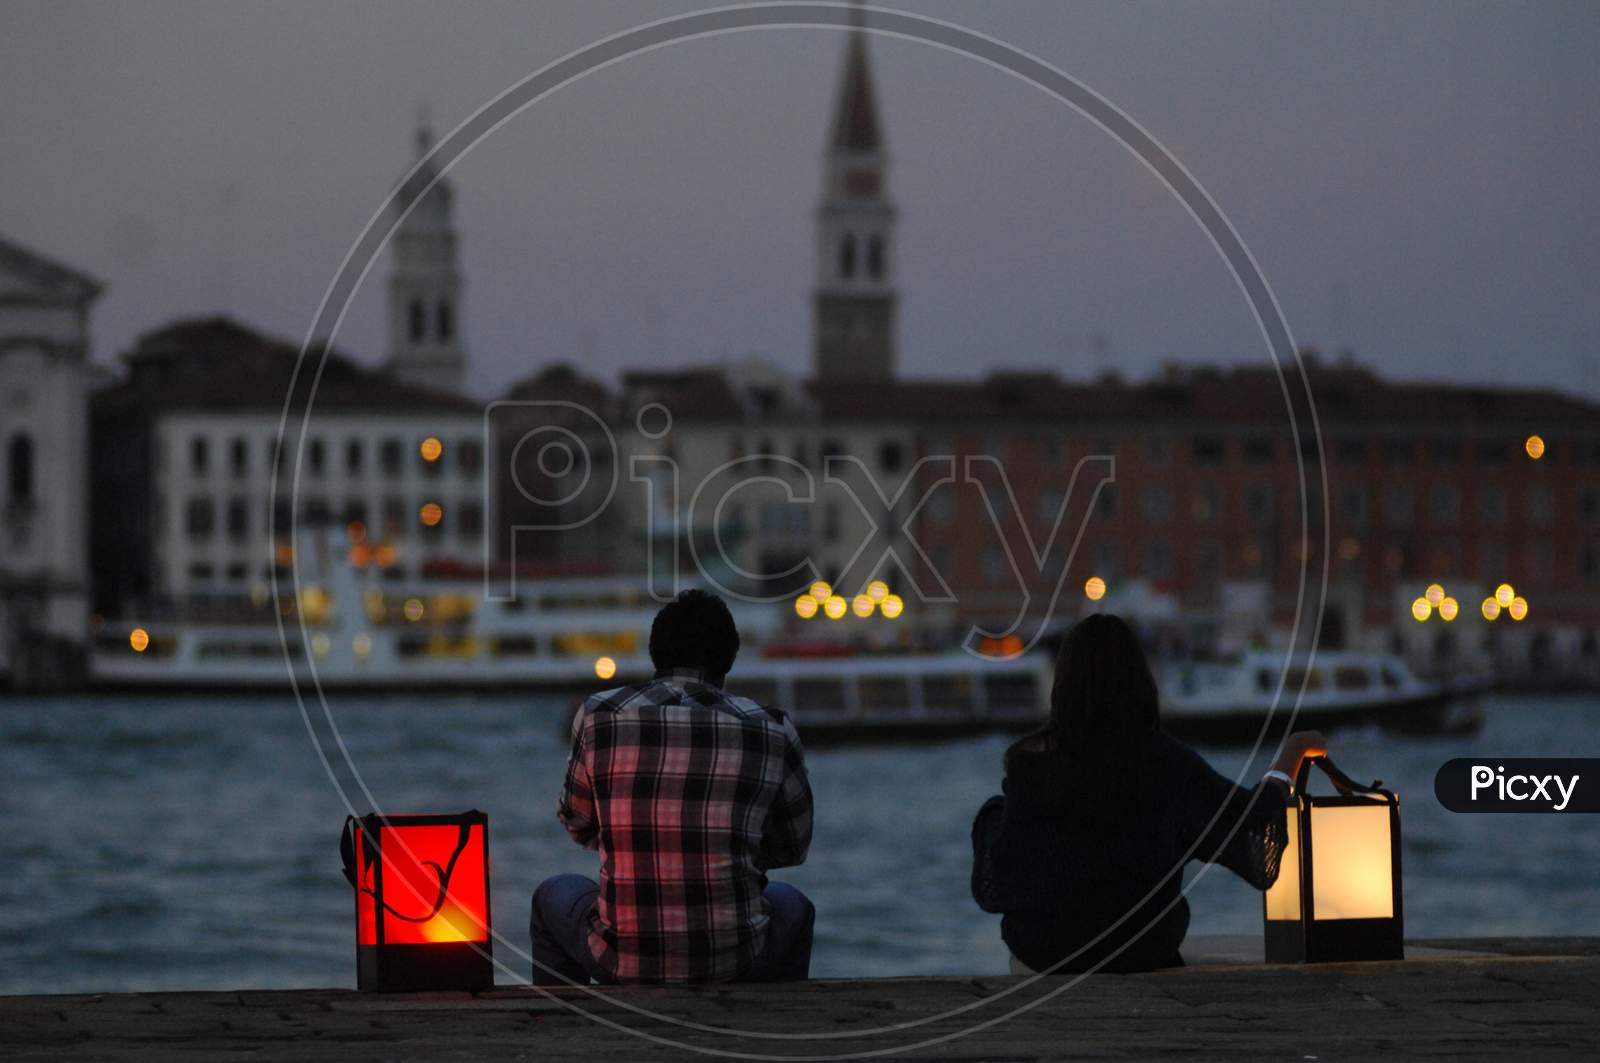 A Couple sitting with lanterns